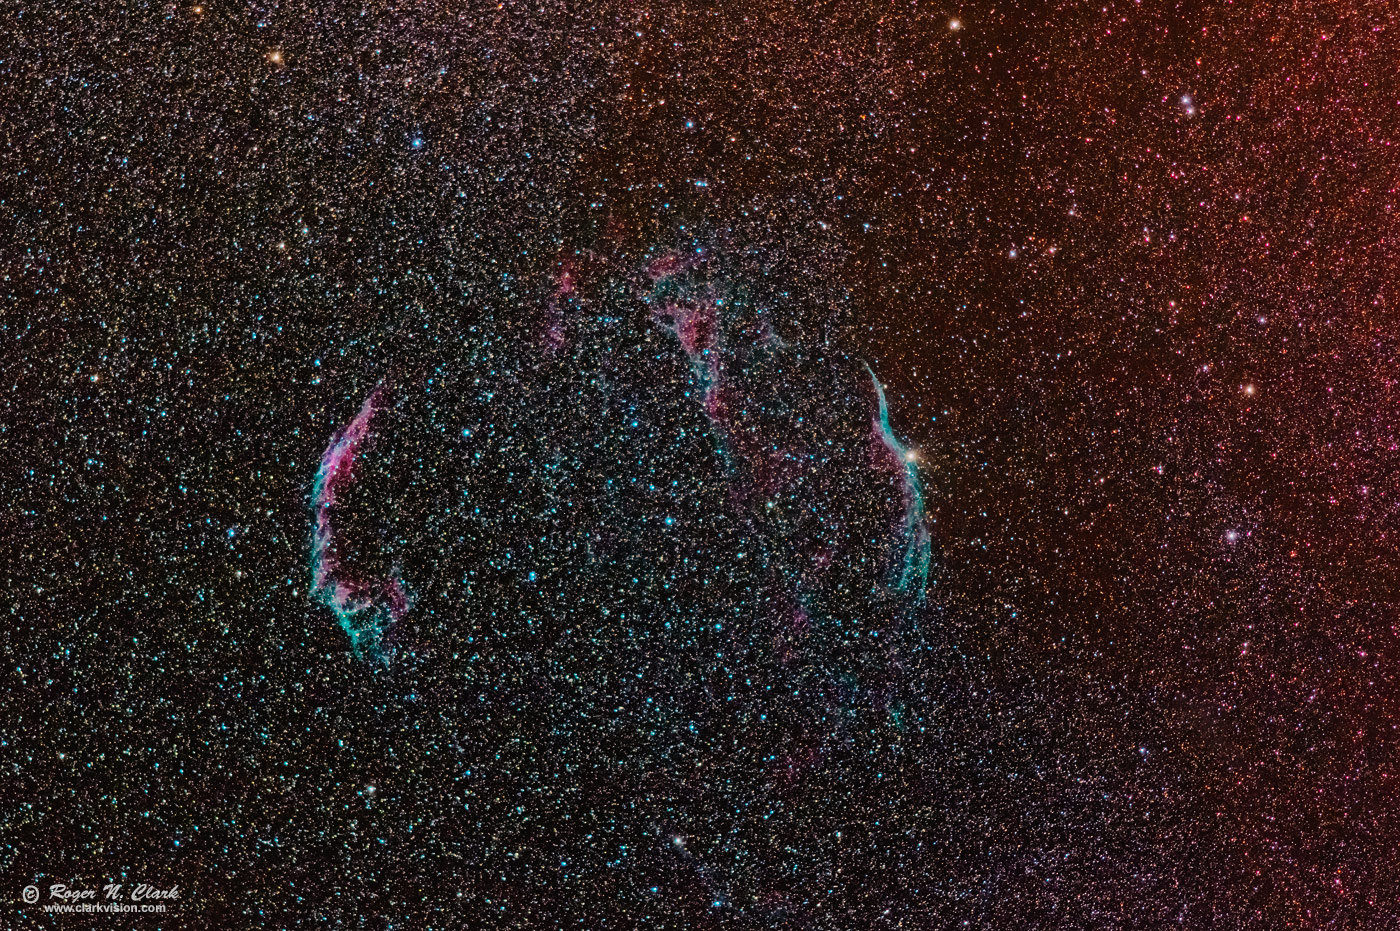 image veil.nebula.200mm.c07.25.2015.0J6A4279-327.g-1400s.jpg is Copyrighted by Roger N. Clark, www.clarkvision.com